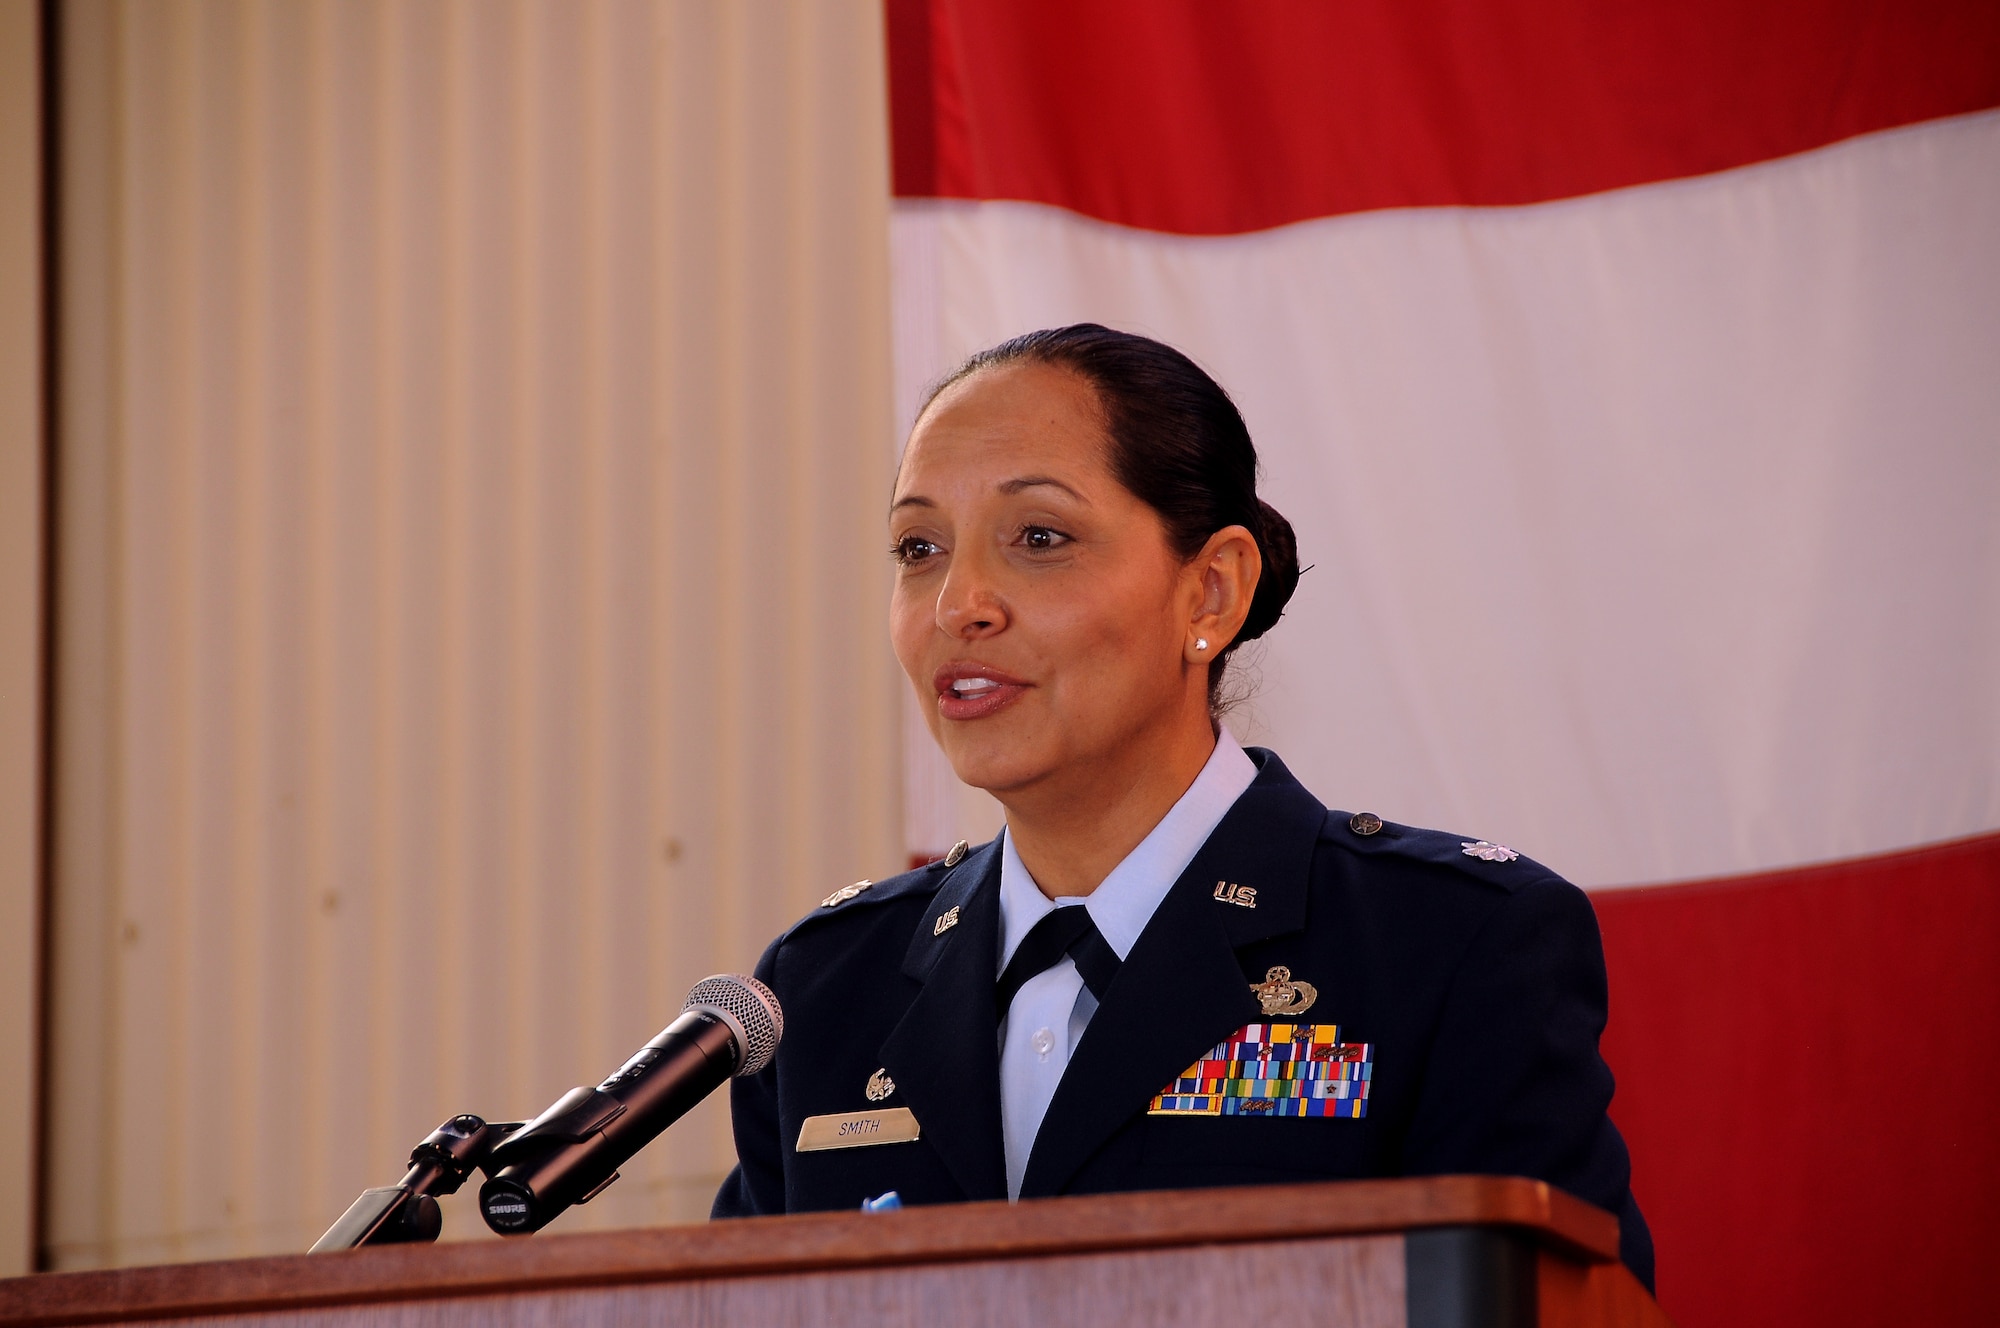 Lt. Col. Susana Smith, commander of the 250th Intelligence Squadron, addresses members of the 150th Special Operations Wing as well as other special guests, during the Aug. 19 ribbon cutting ceremony of their newly remodeled building. (U.S. National Guard photo by Master Sgt. Paula Aragon)